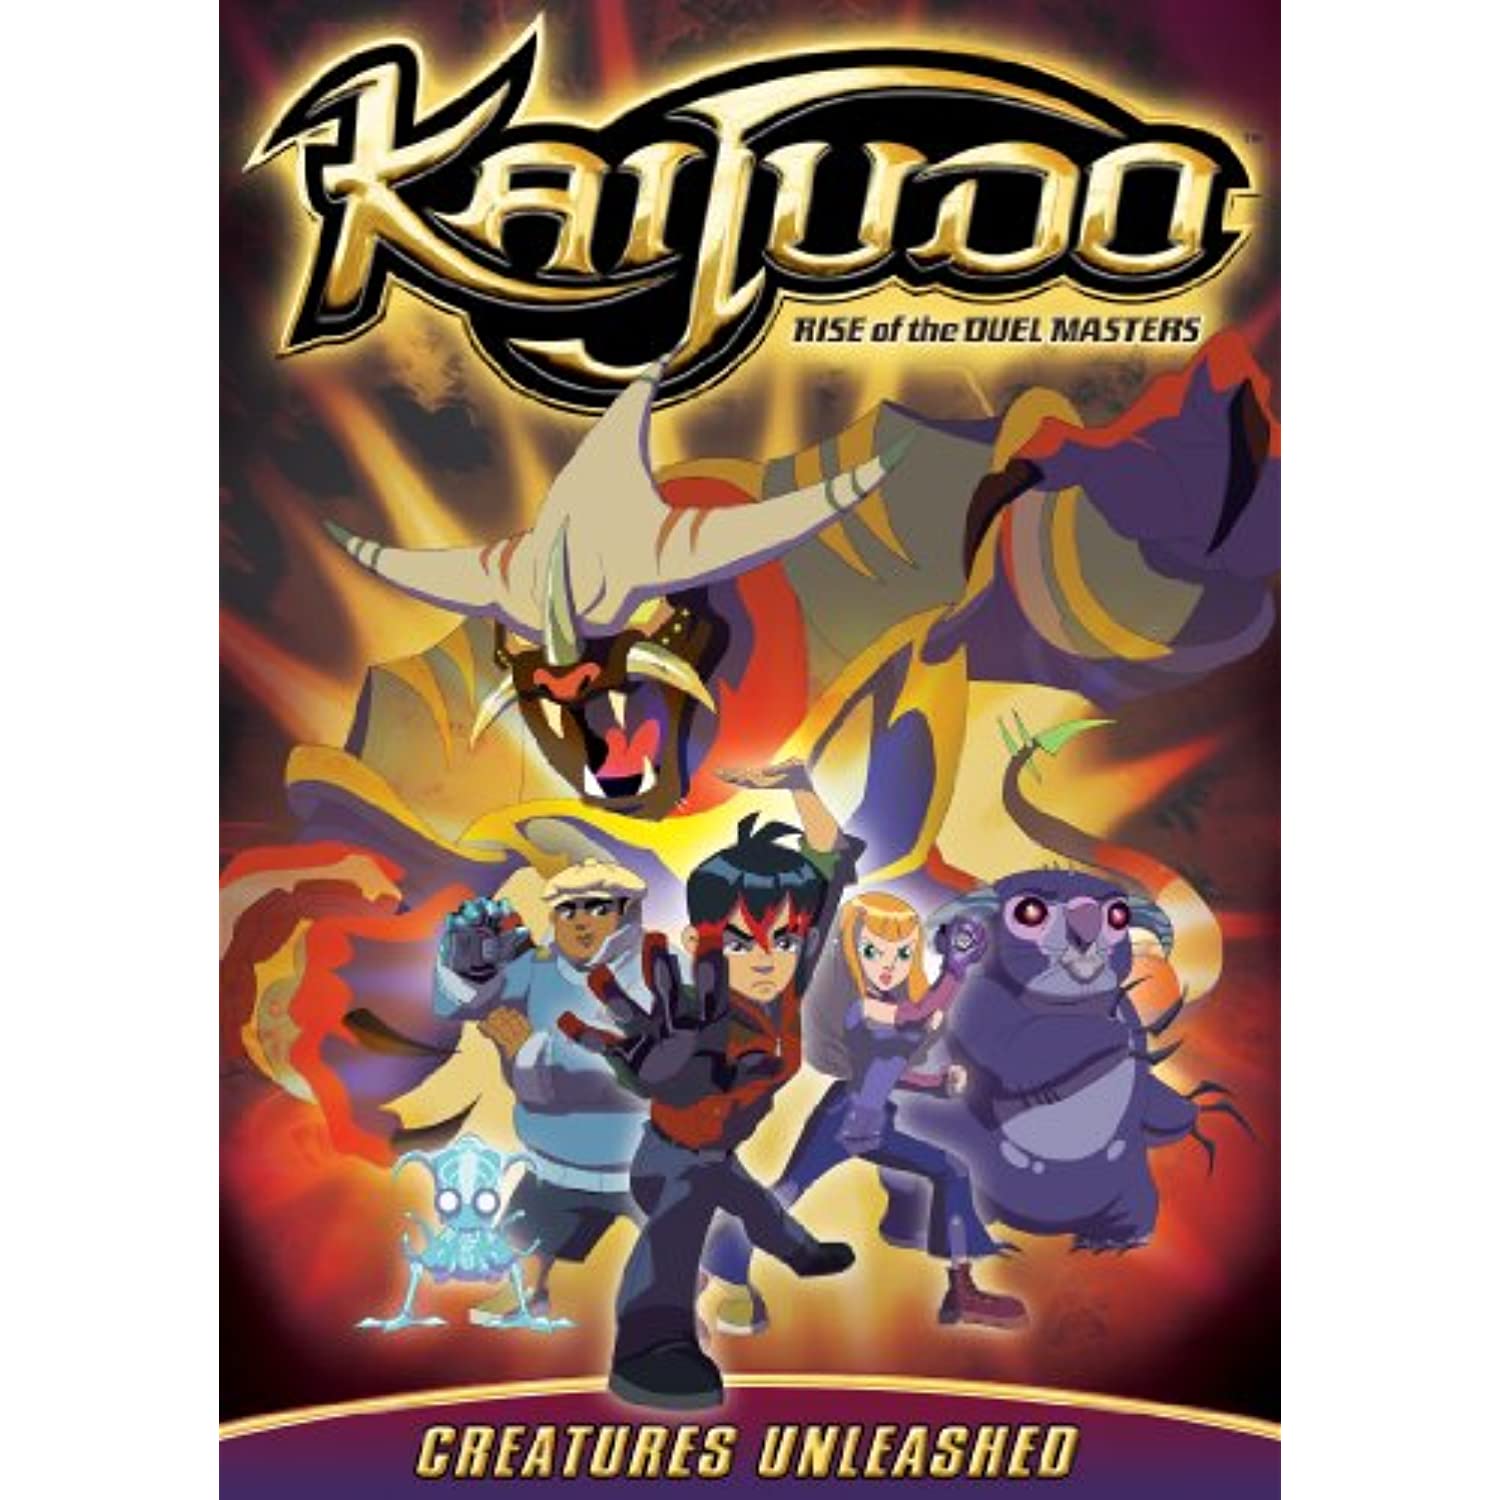 Kaijudo: Rise Of The Duel Masters: Creatures Unleashed DVD - image 1 of 2